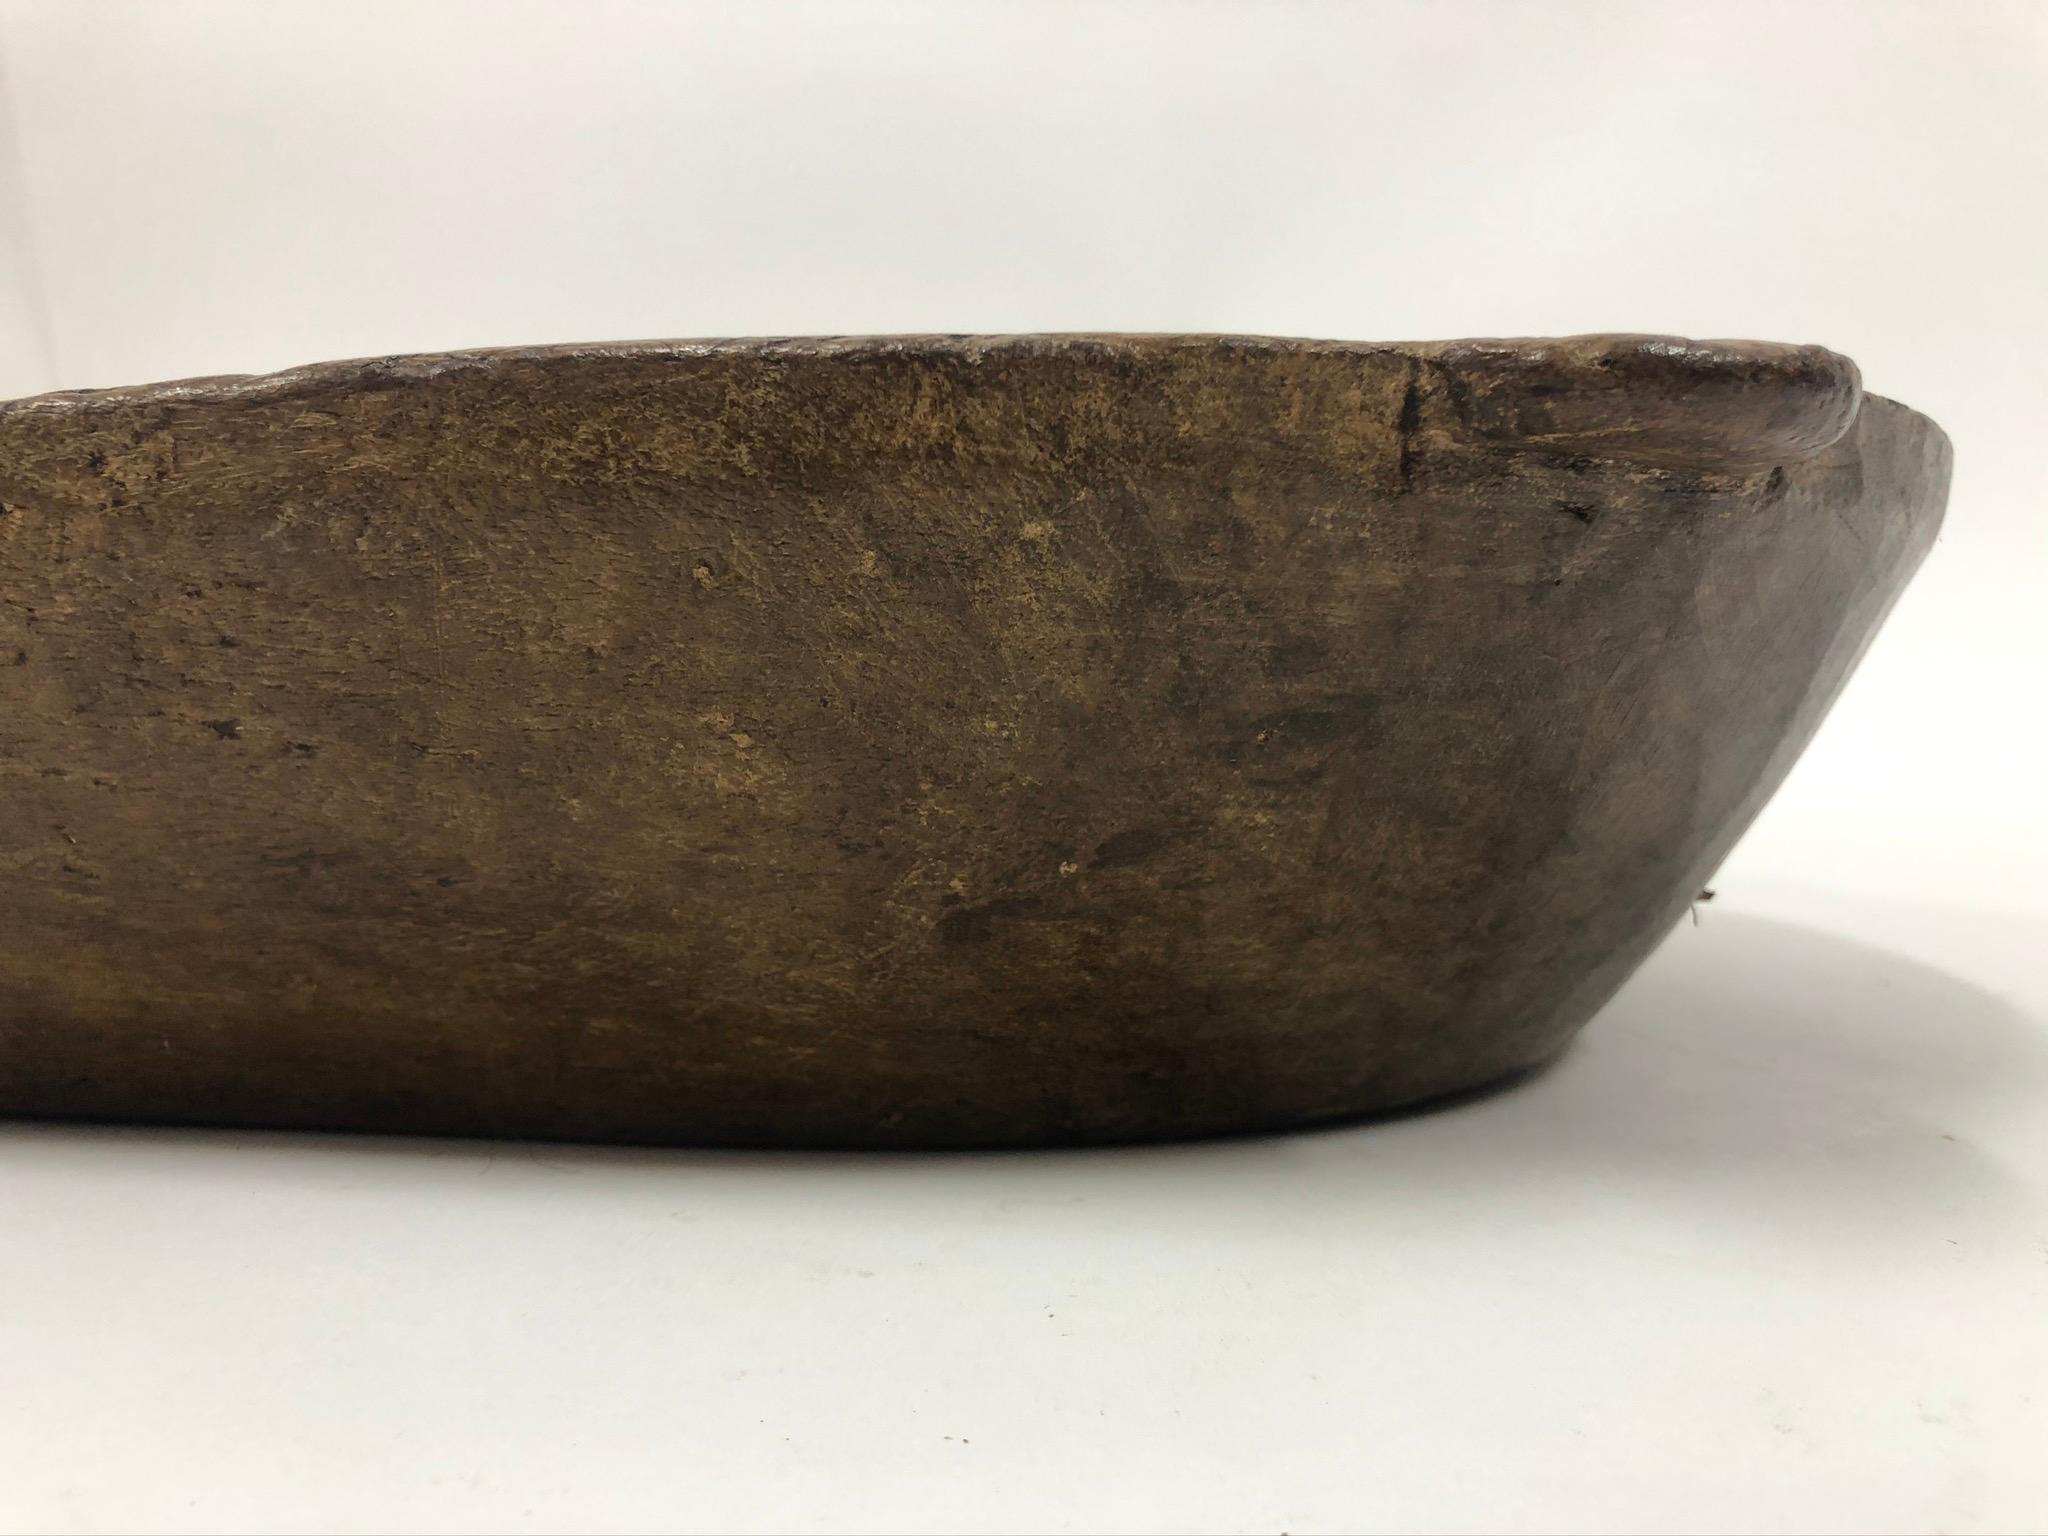 African carved wood bowl

Property from esteemed interior designer Juan Montoya. Juan Montoya is one of the most acclaimed and prolific interior designers in the world today. Juan Montoya was born and spent his early years in Colombia. After